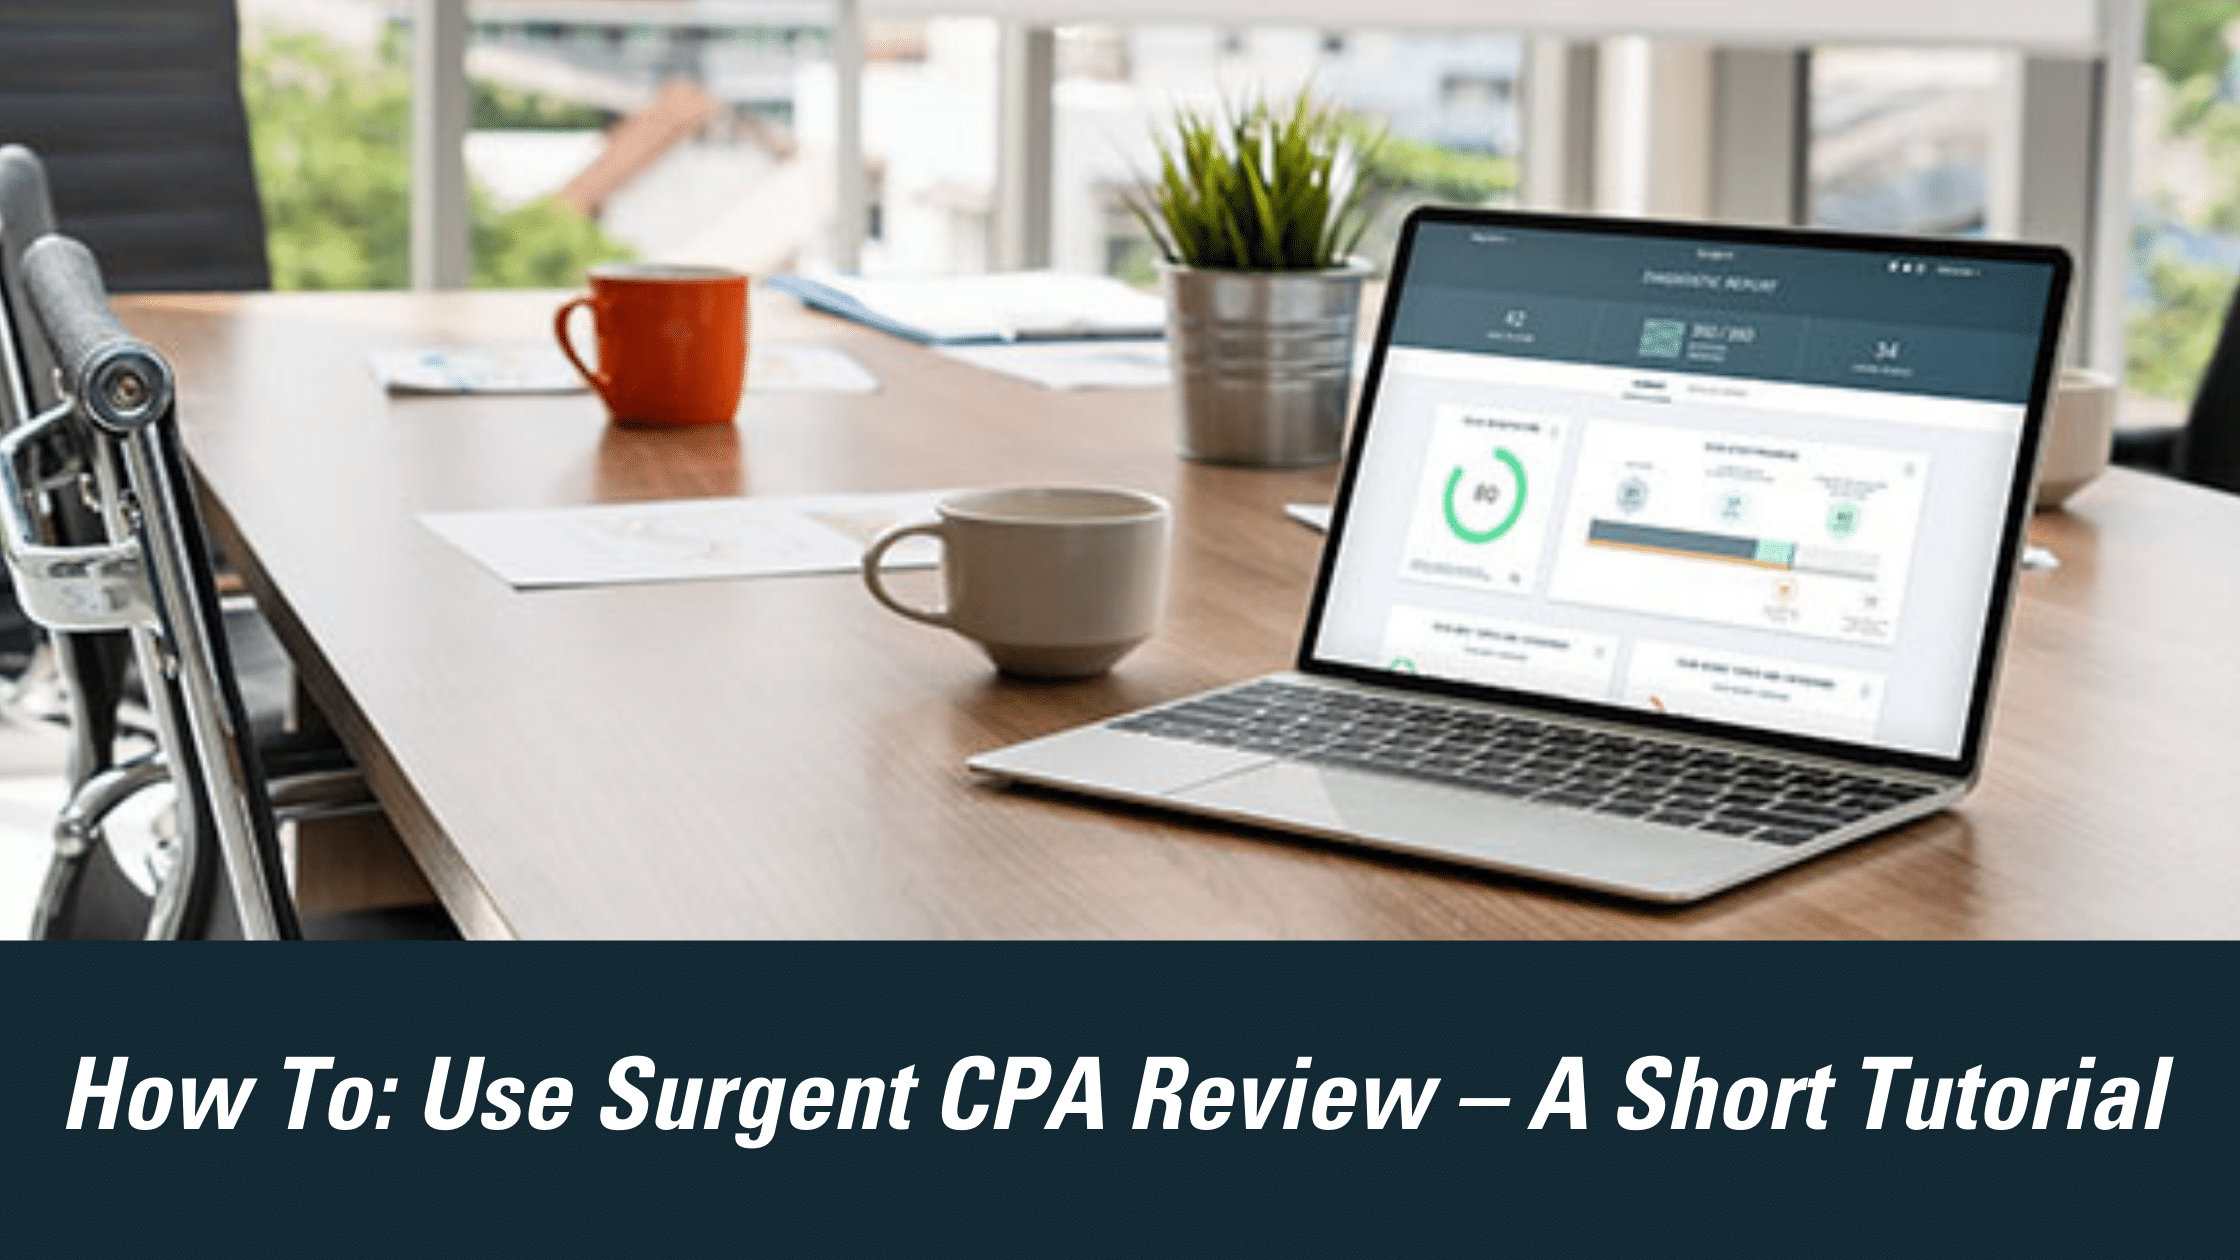 Tutorial: How to use Surgent CPA Review